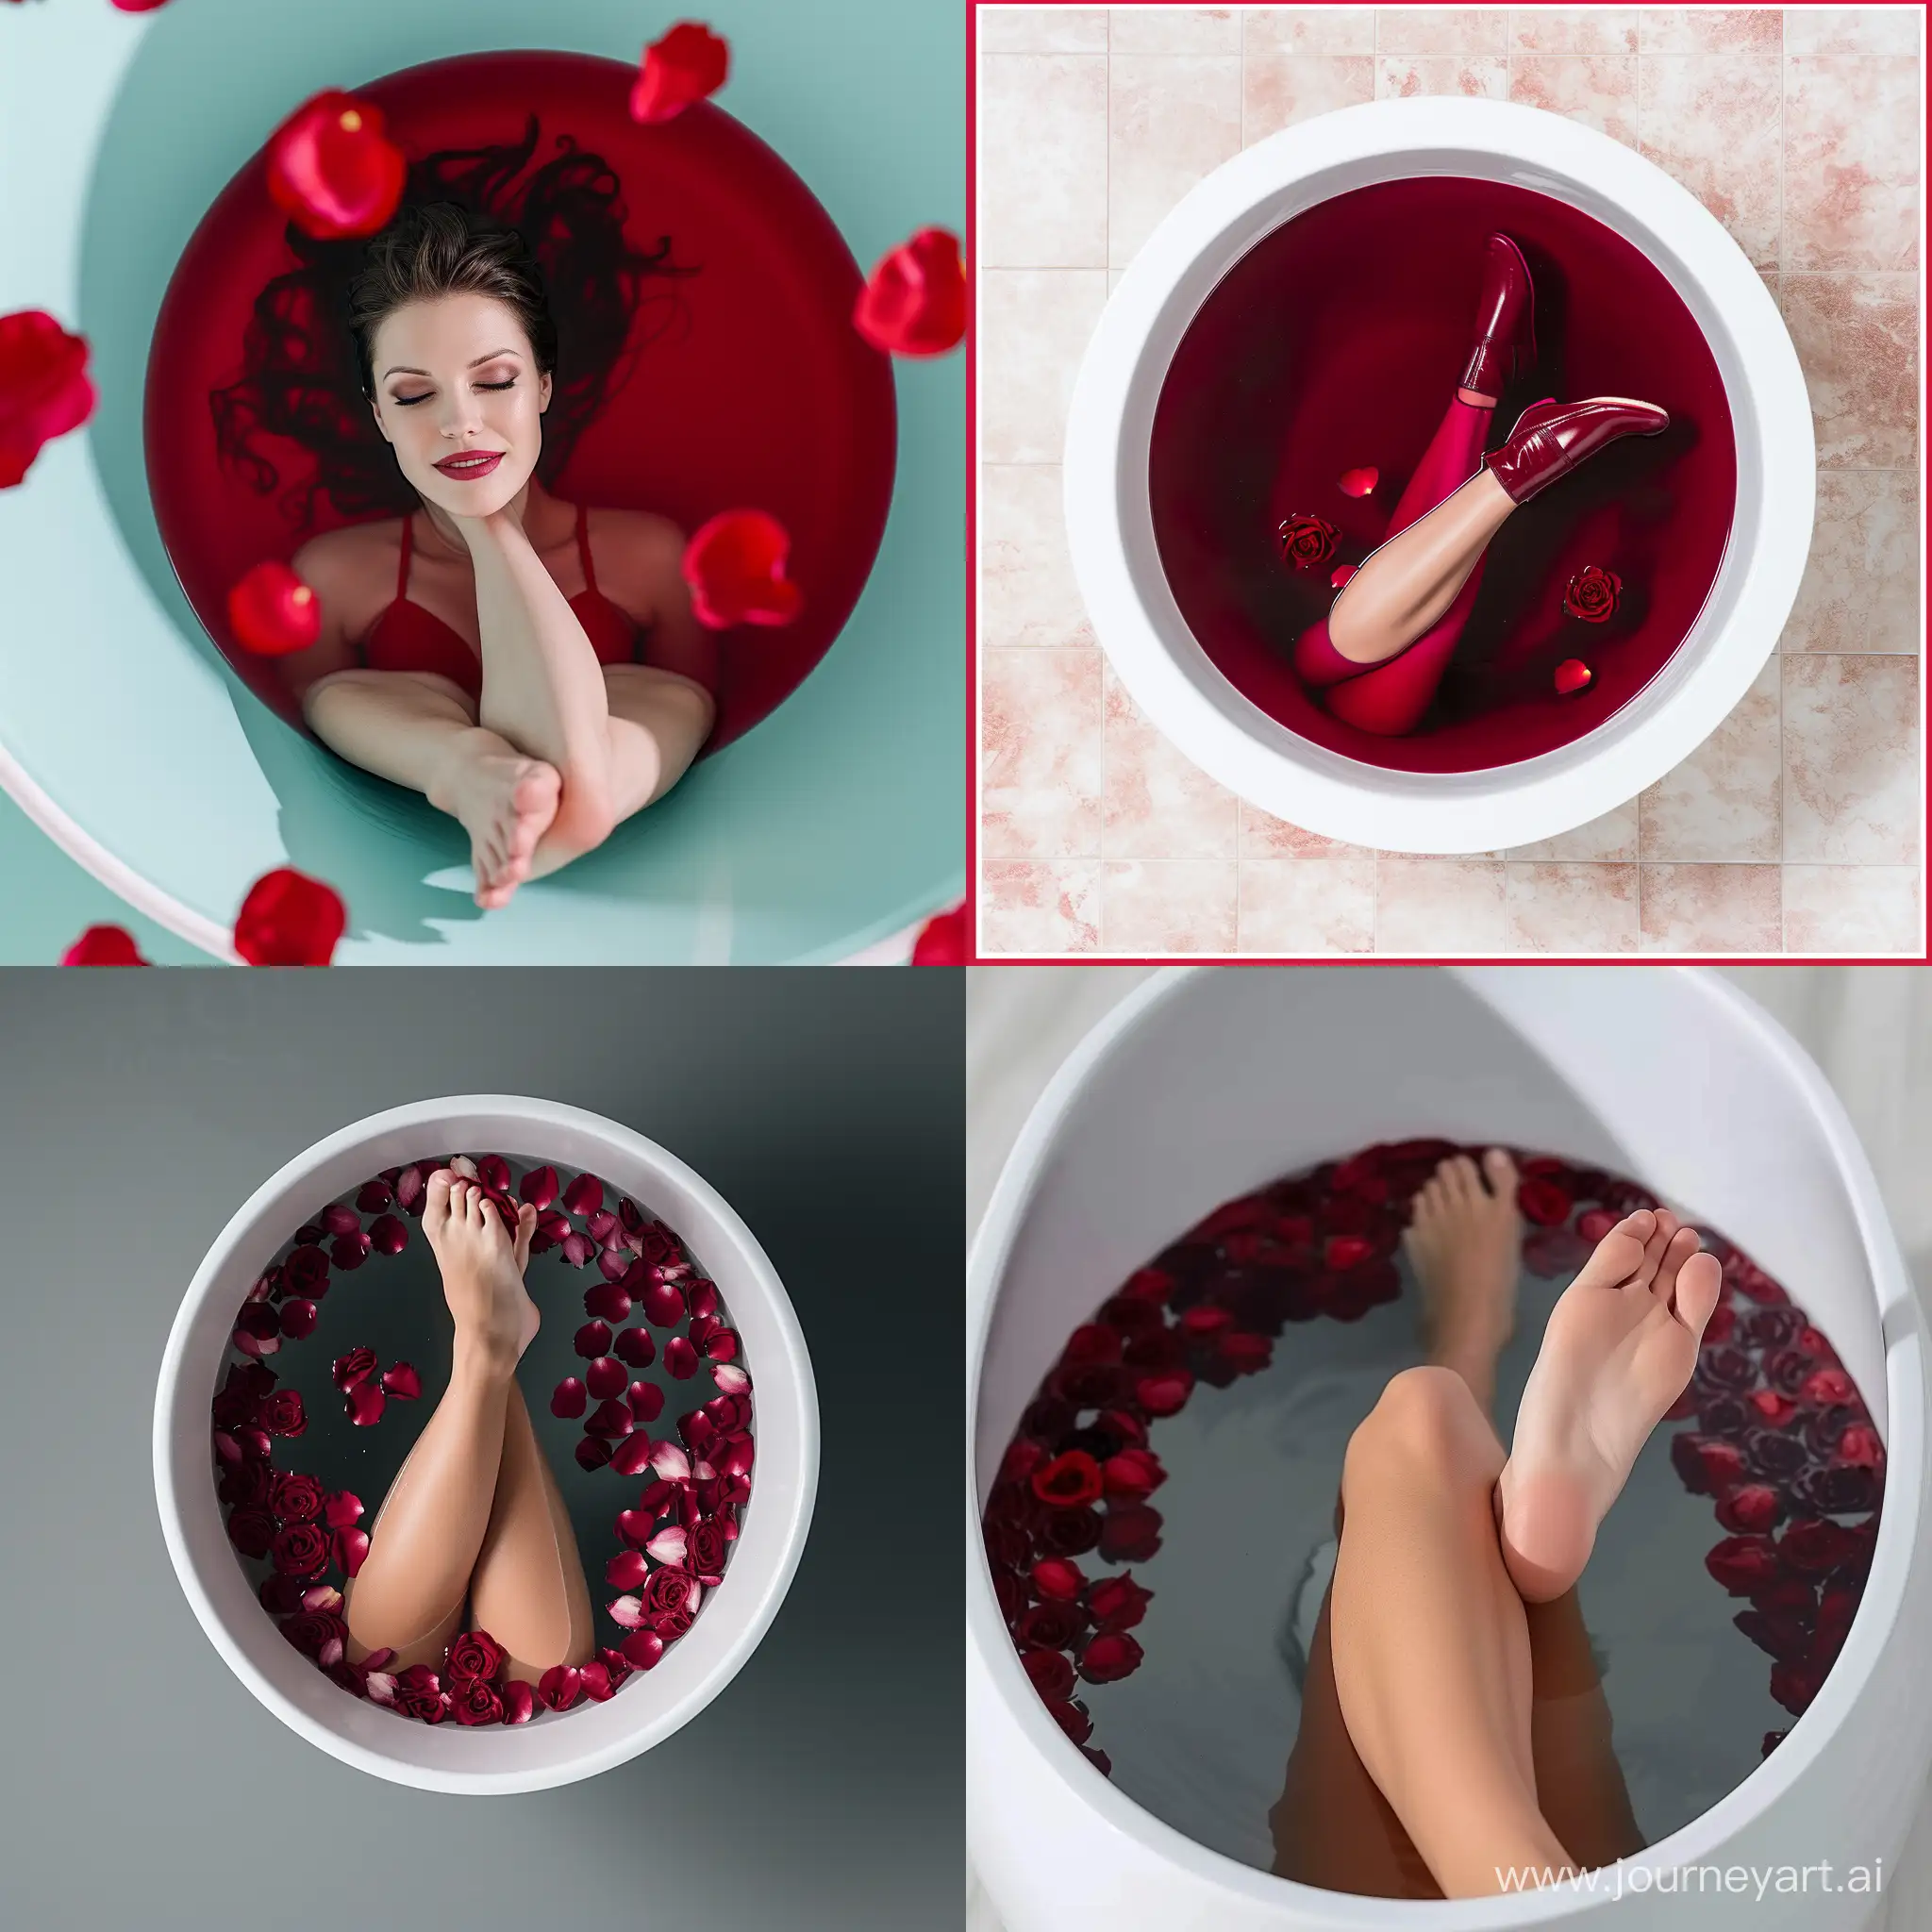 Hour glass physique, Top down view, brunette model that doesn’t exist in real life, in a  porcelain modern bath tub, the rose pettels of the deeper red in the water, her one leg is out the water, relaxed, closed eyes